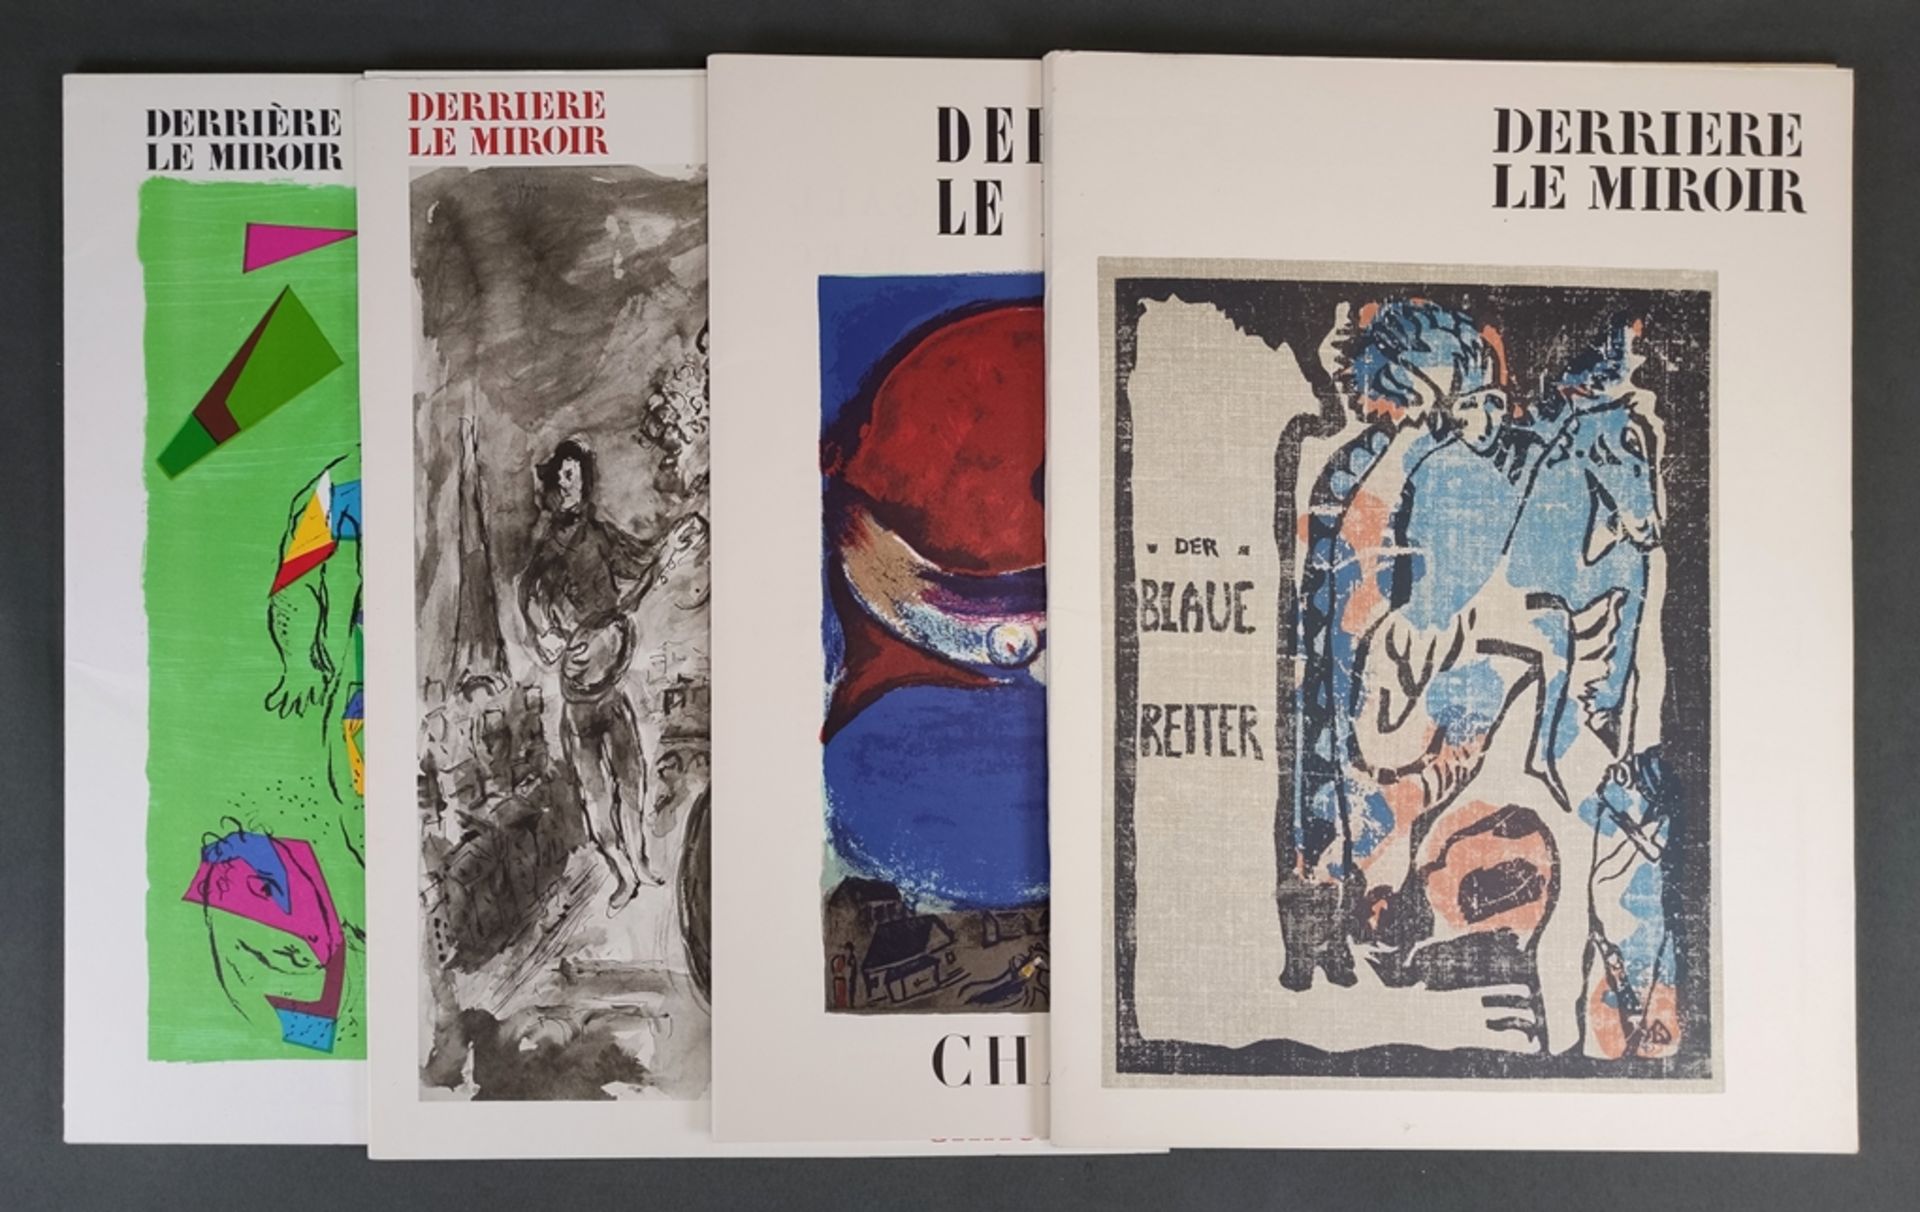 Derriere le Miroir, collection of four issues with original prints by Marc Chagall, Wassily Kandins